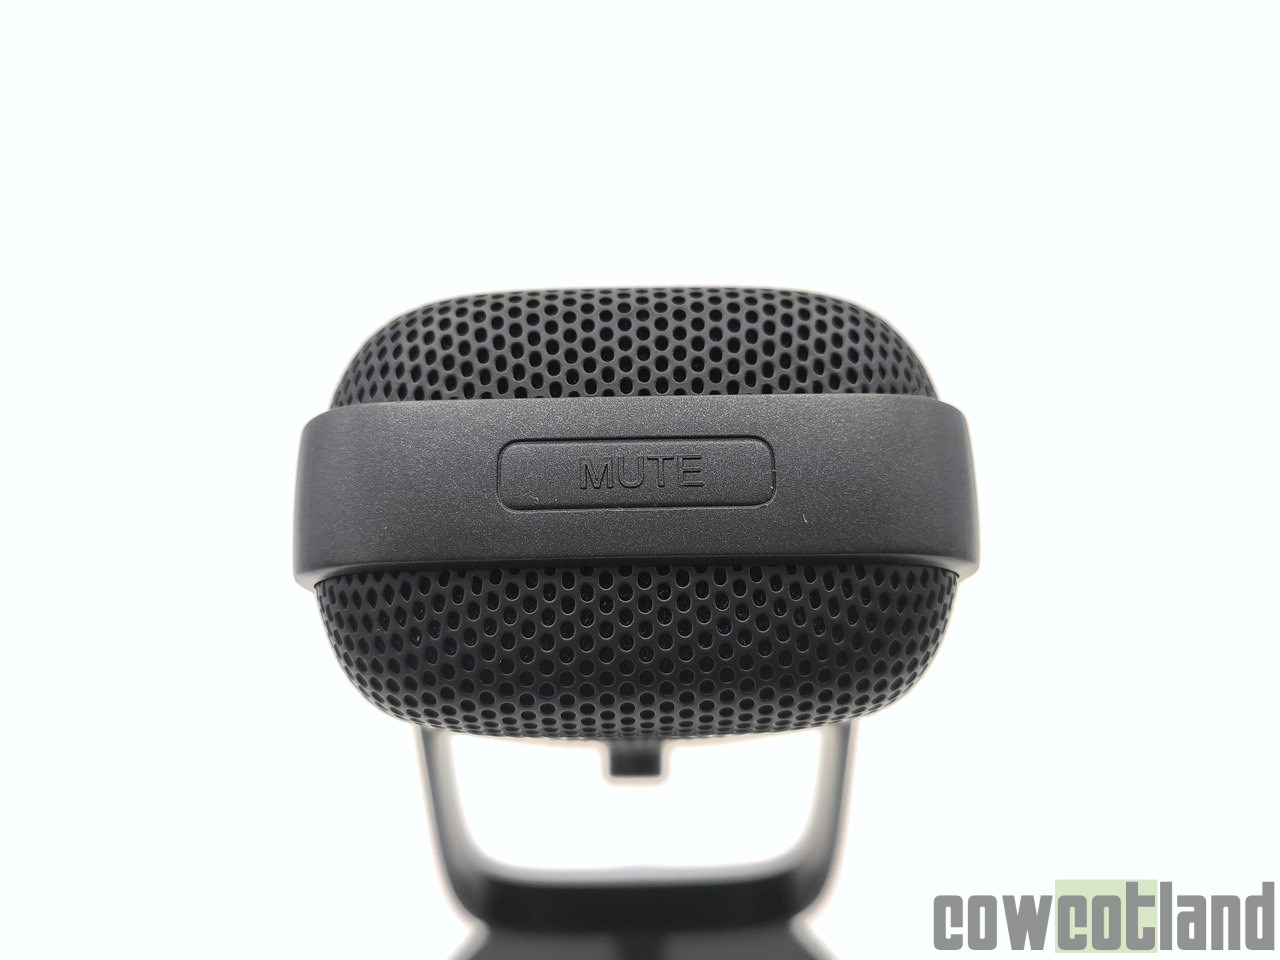 Image 44882, galerie Test Elgato Wave:3, un microphone cardiode USB taill pour le streaming